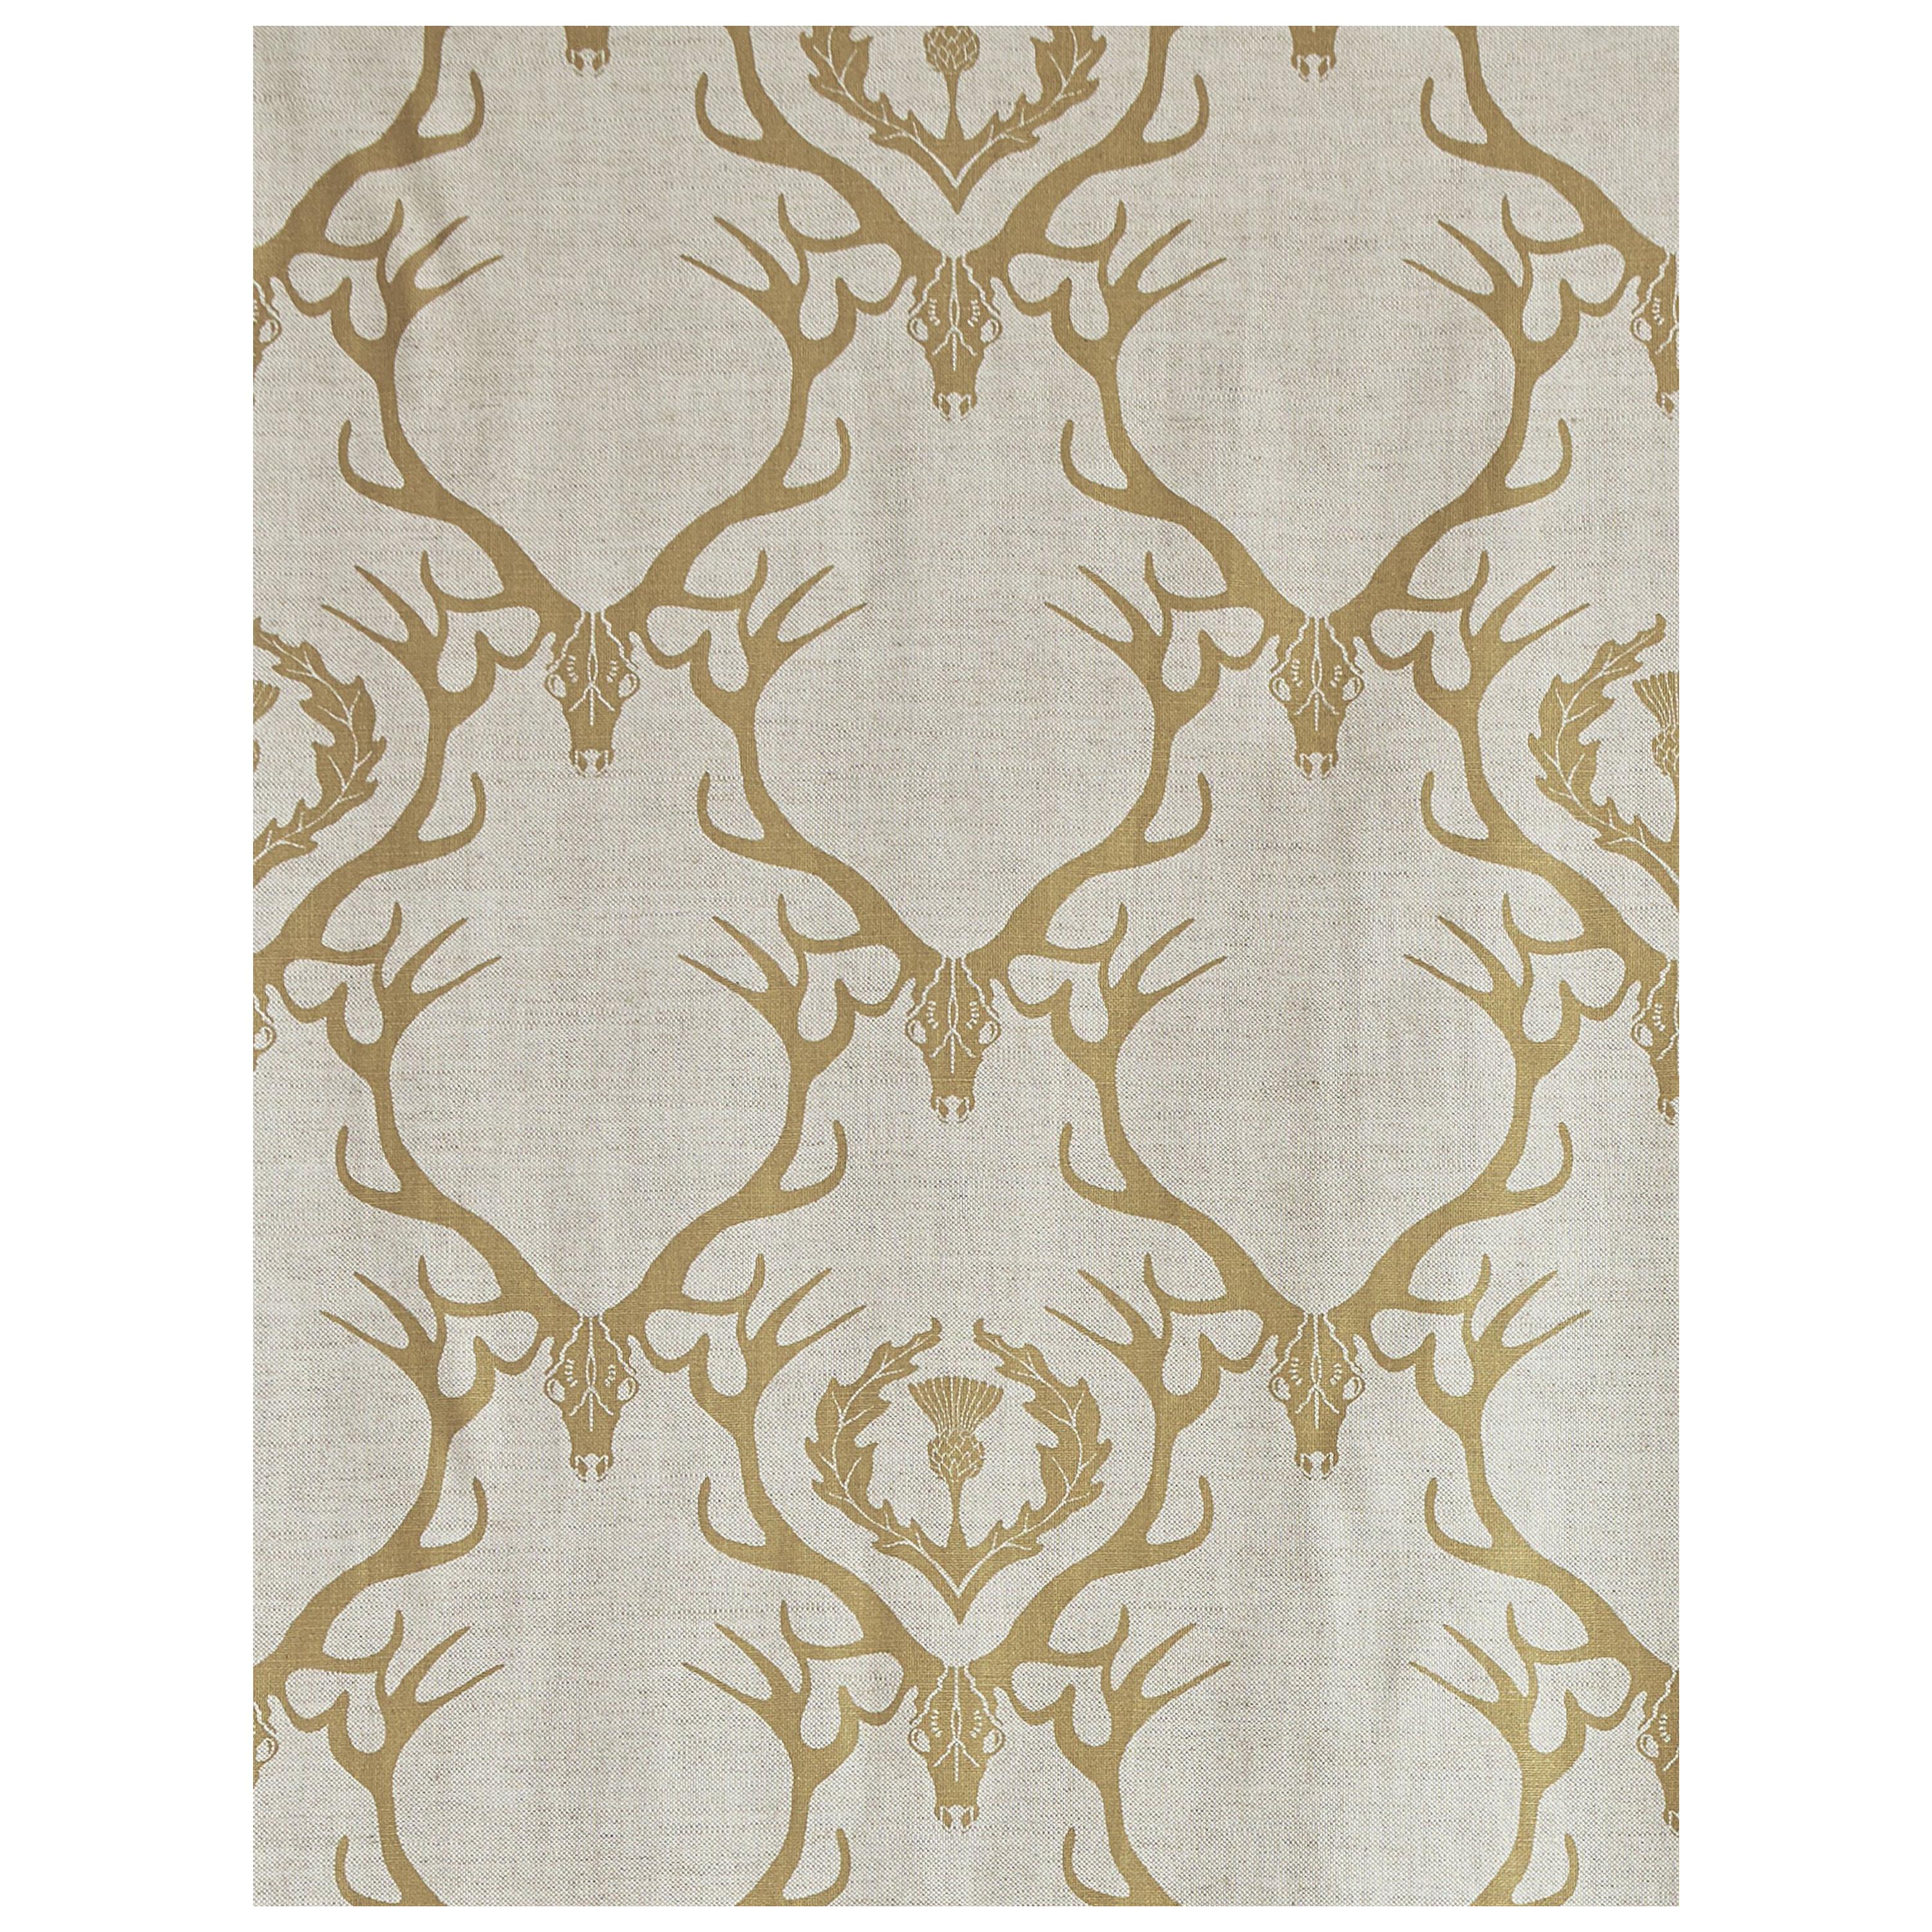 'Deer Damask' Contemporary, Traditional Fabric in Gold For Sale